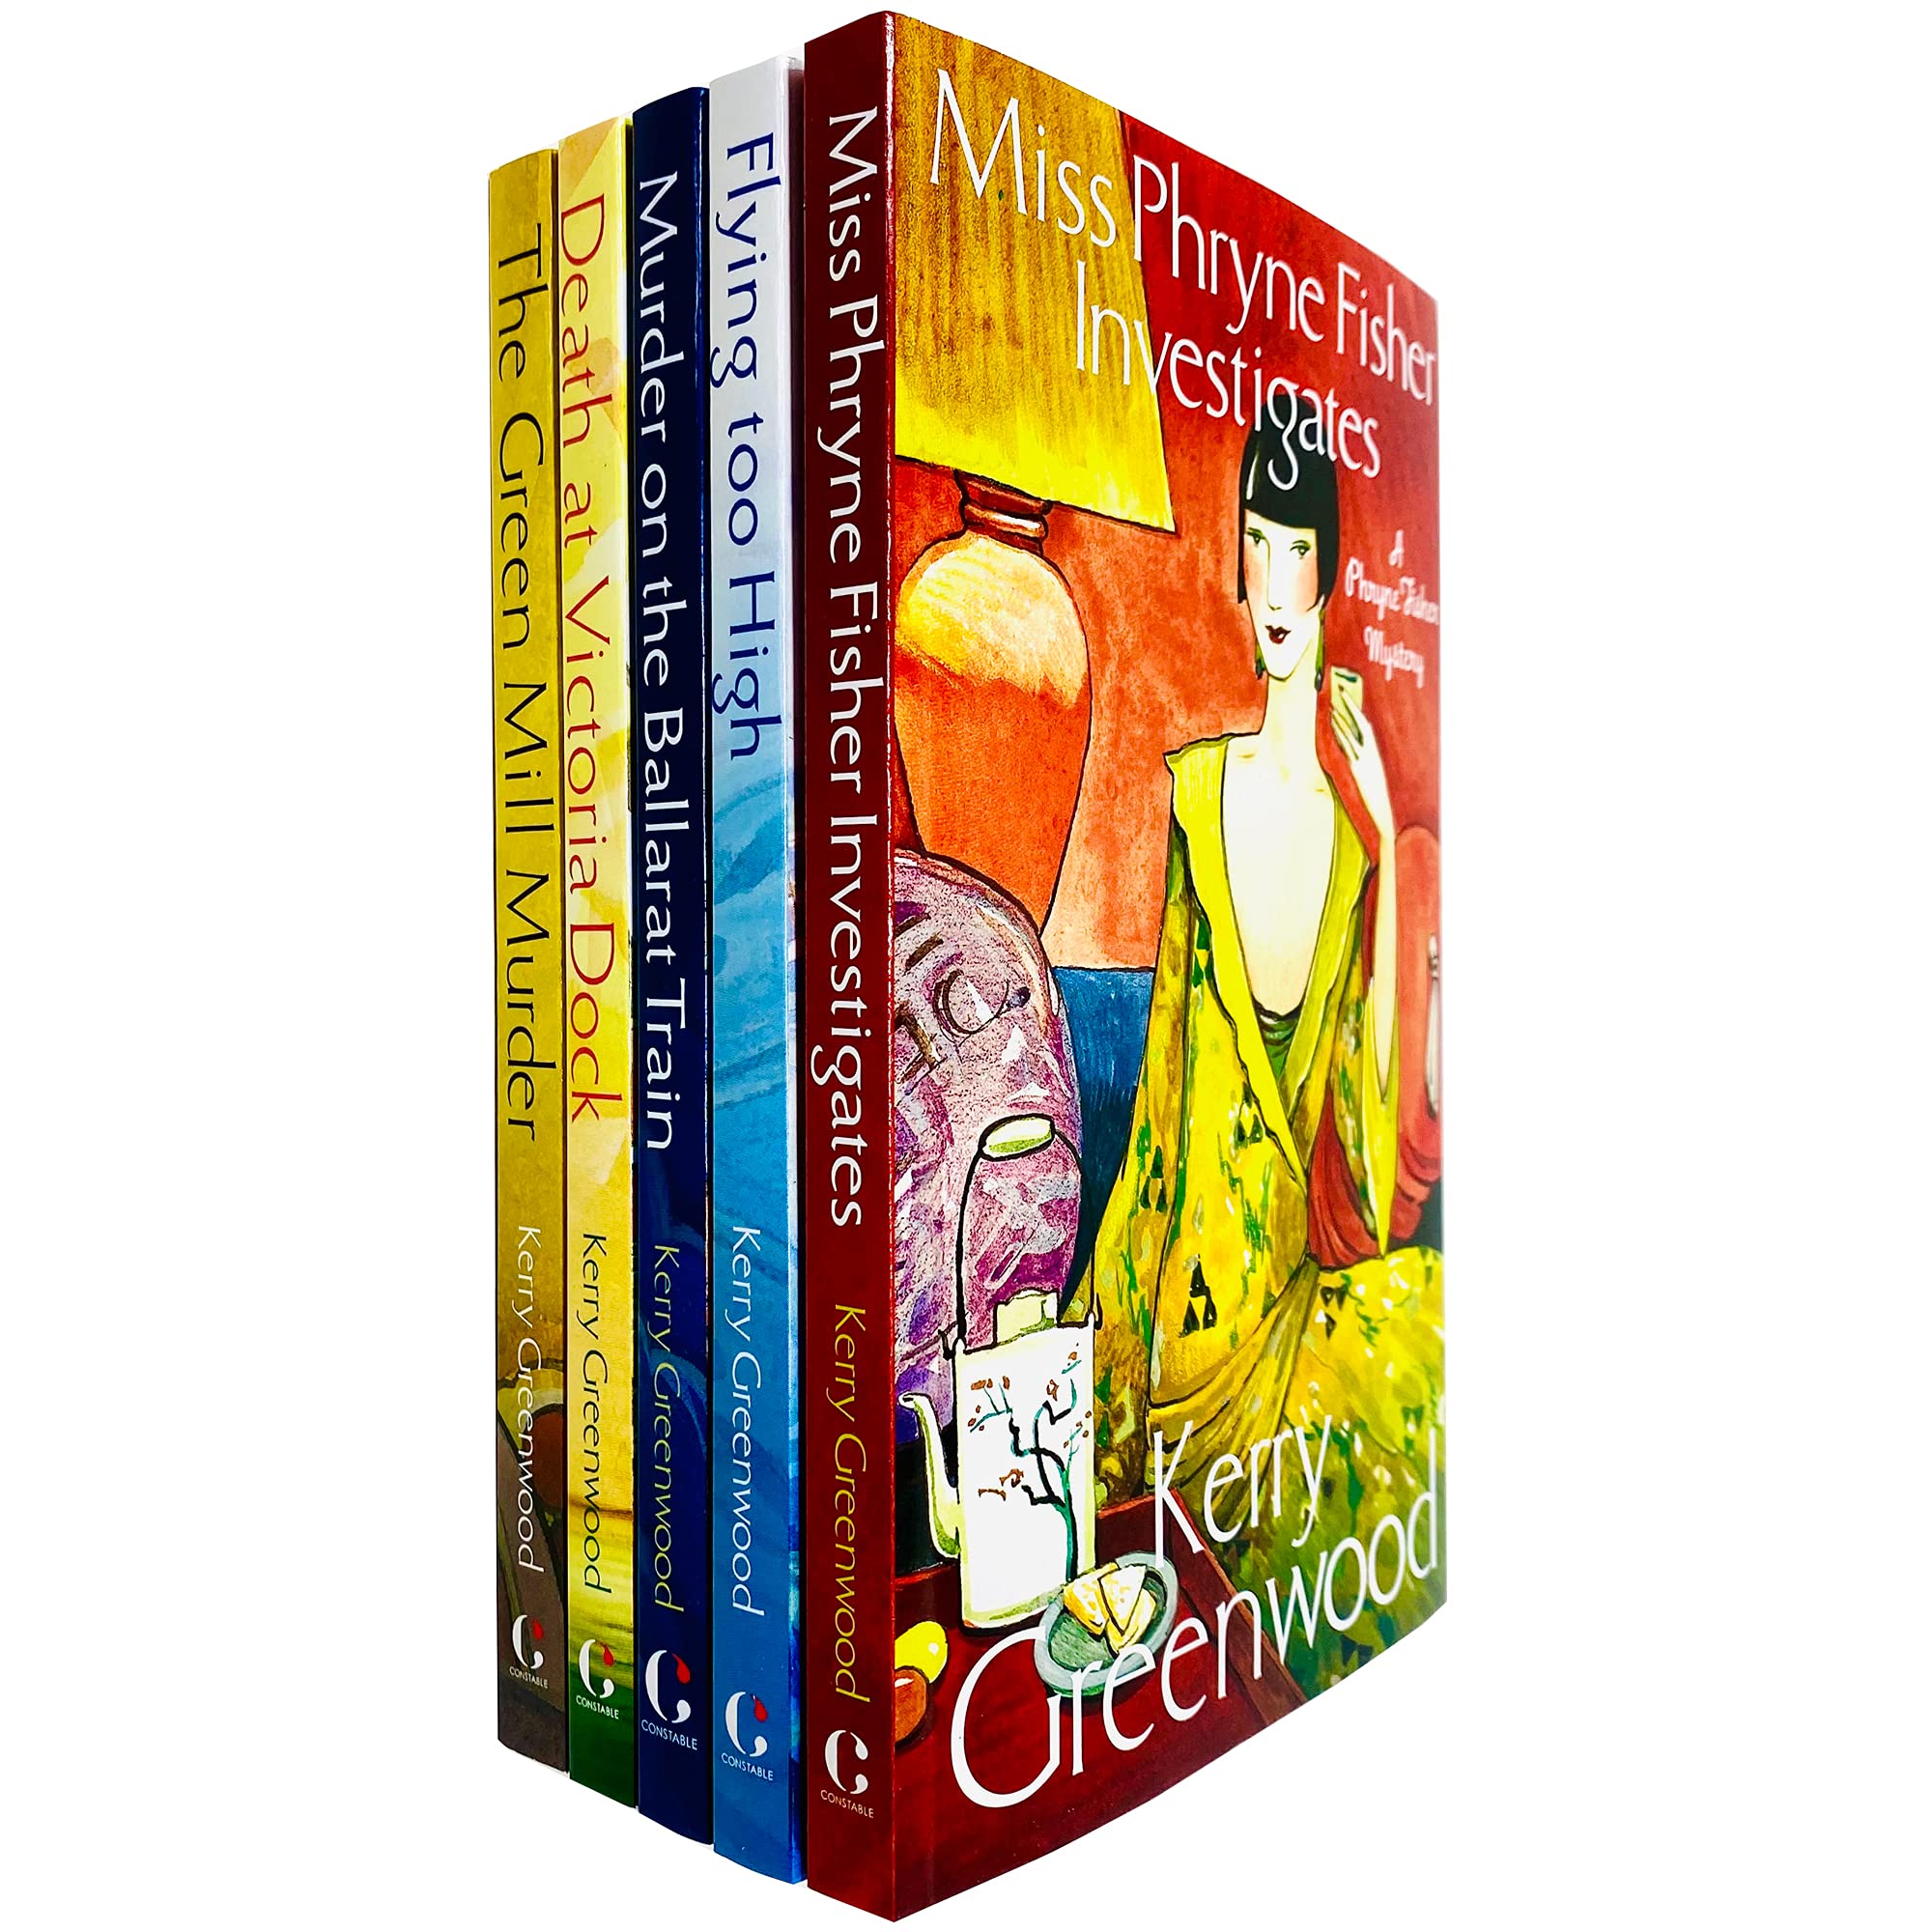 Phryne Fisher Murder Mystery Series Books 1-5 Collection Set (Paperback 5권)